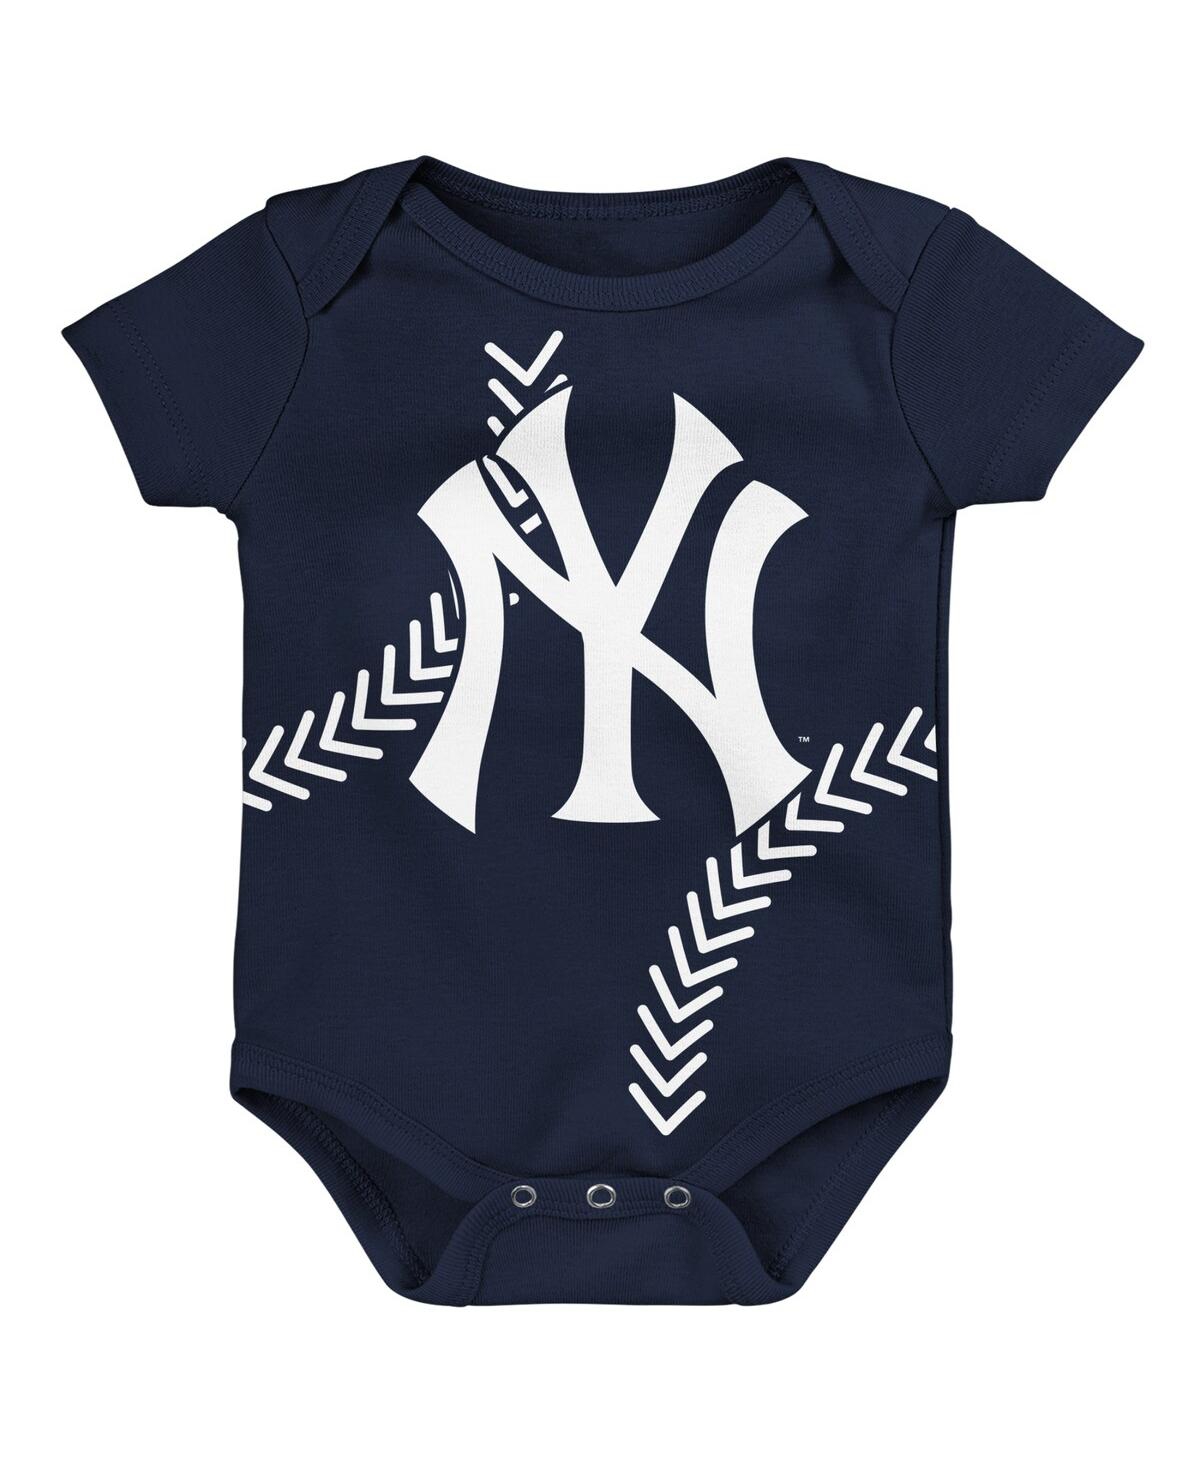 OUTERSTUFF NEWBORN AND INFANT BOYS AND GIRLS NAVY NEW YORK YANKEES RUNNING HOME BODYSUIT